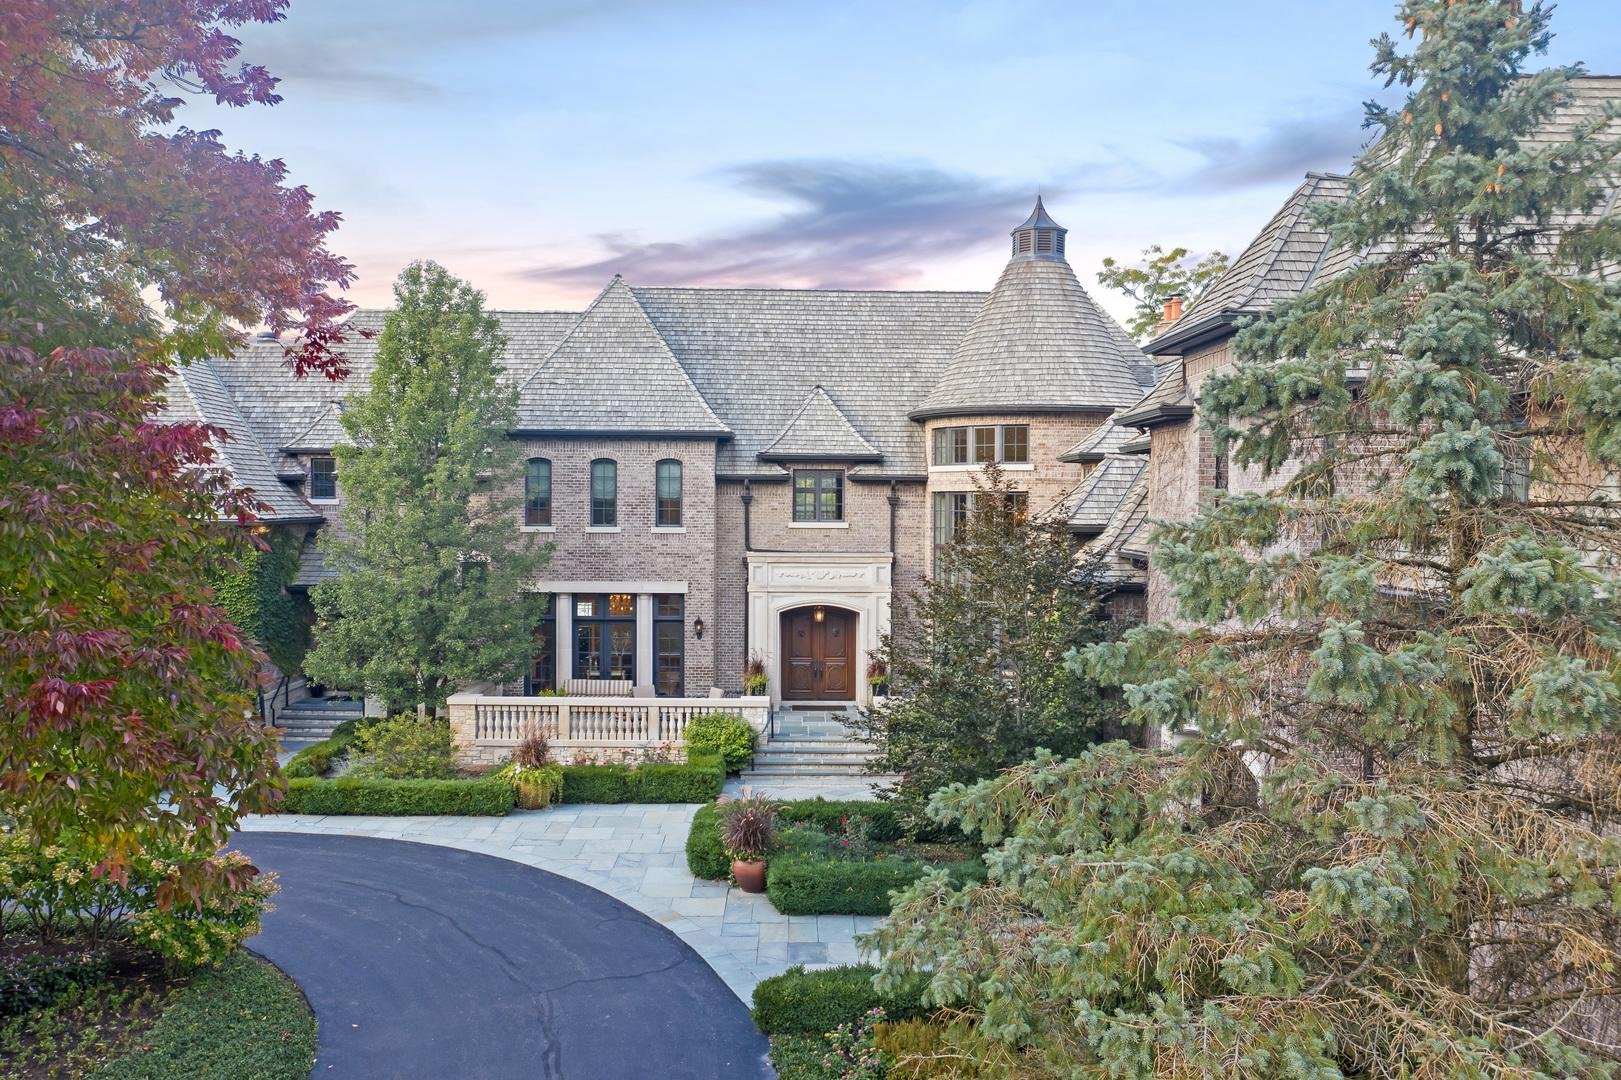 Francis York One of the Most Beautiful Homes For Sale in Illinois 1.jpg